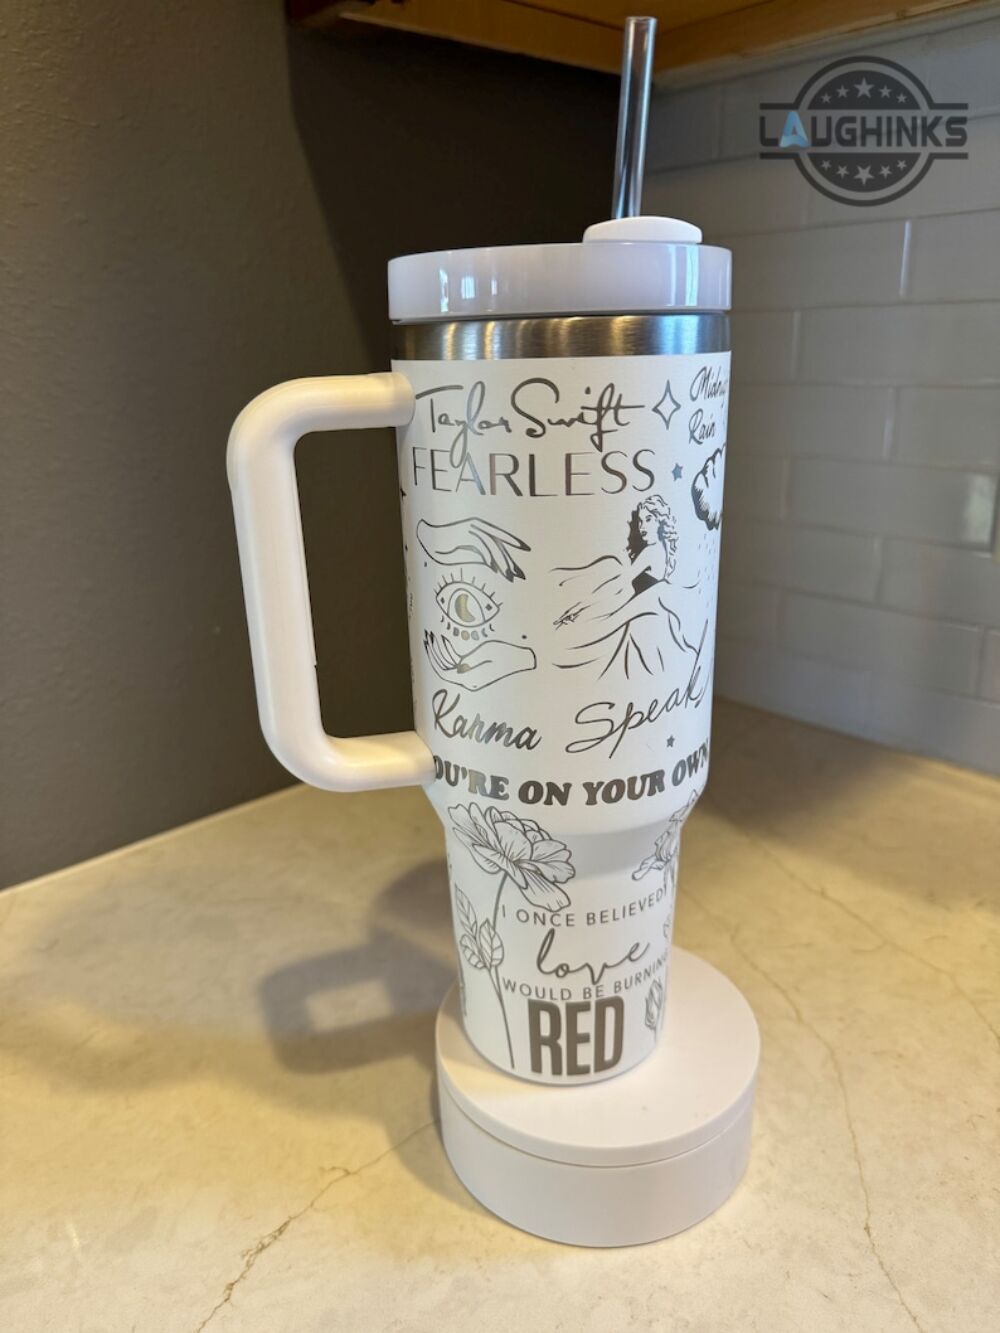 How to Sublimate a 40 oz Tumbler // STANLEY TUMBLER DUPE 